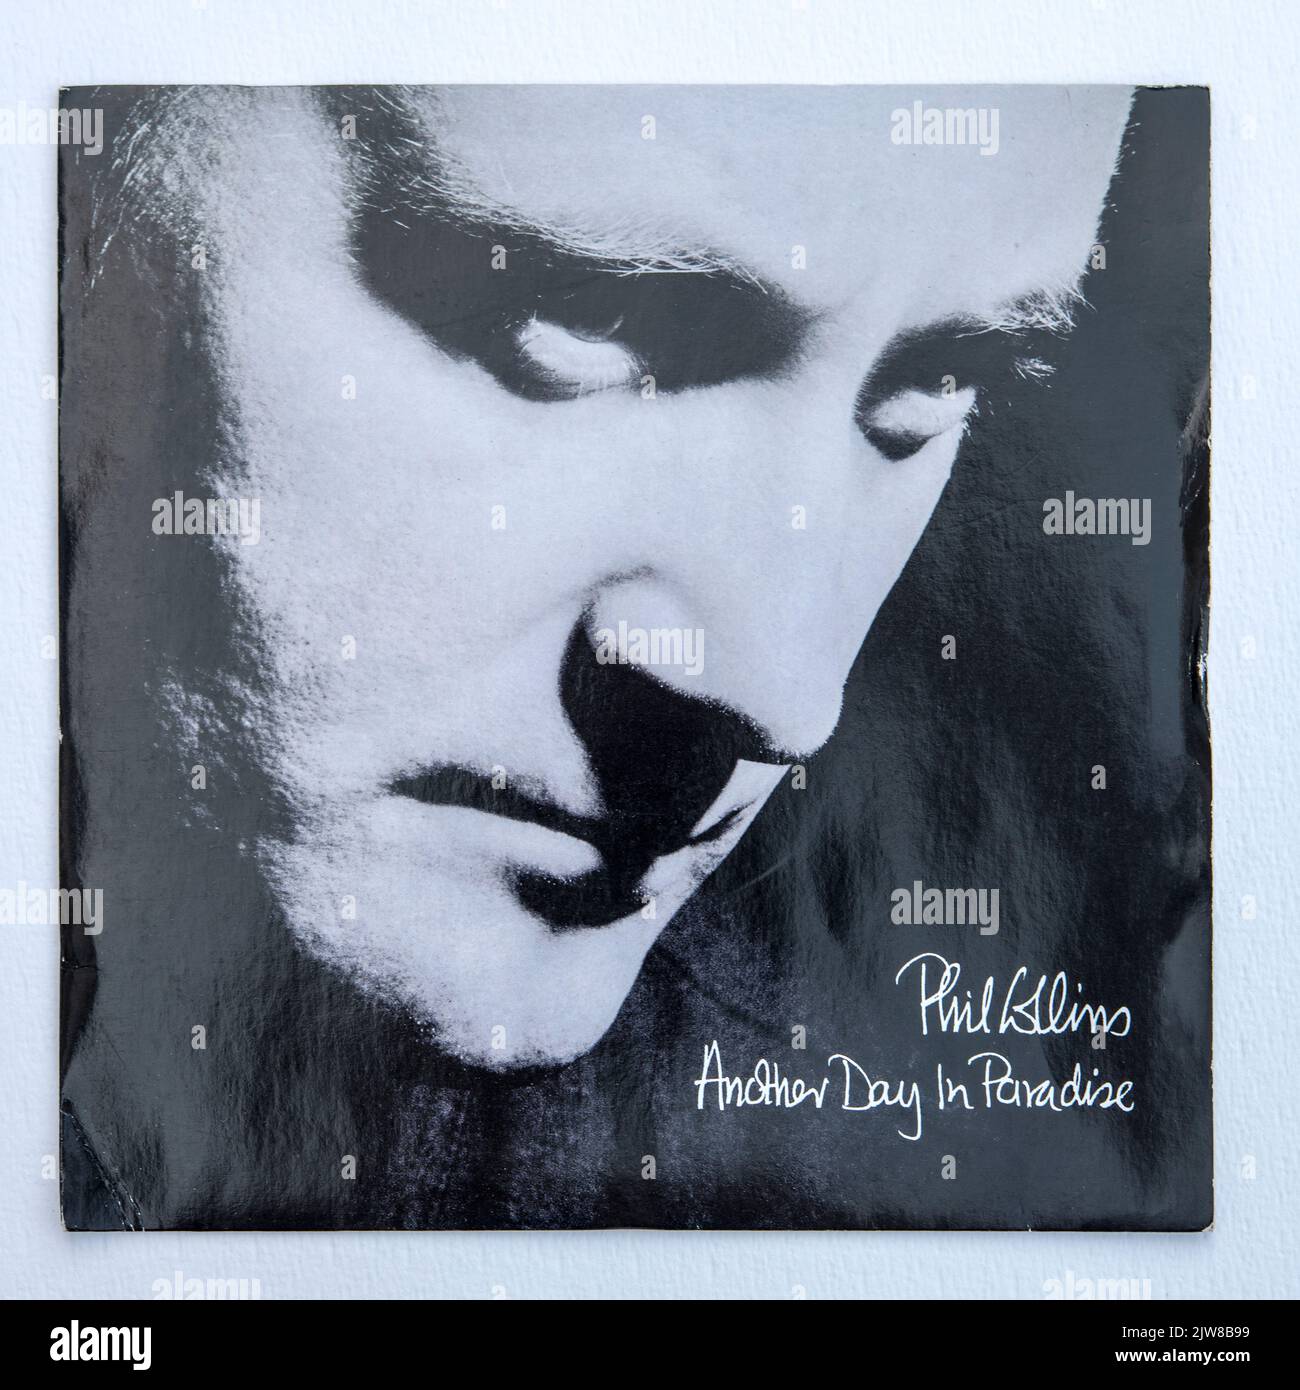 Picture cover of the seven inch single version of Another Day in Paradise by Phil Collins, which was released in 1989. Stock Photo